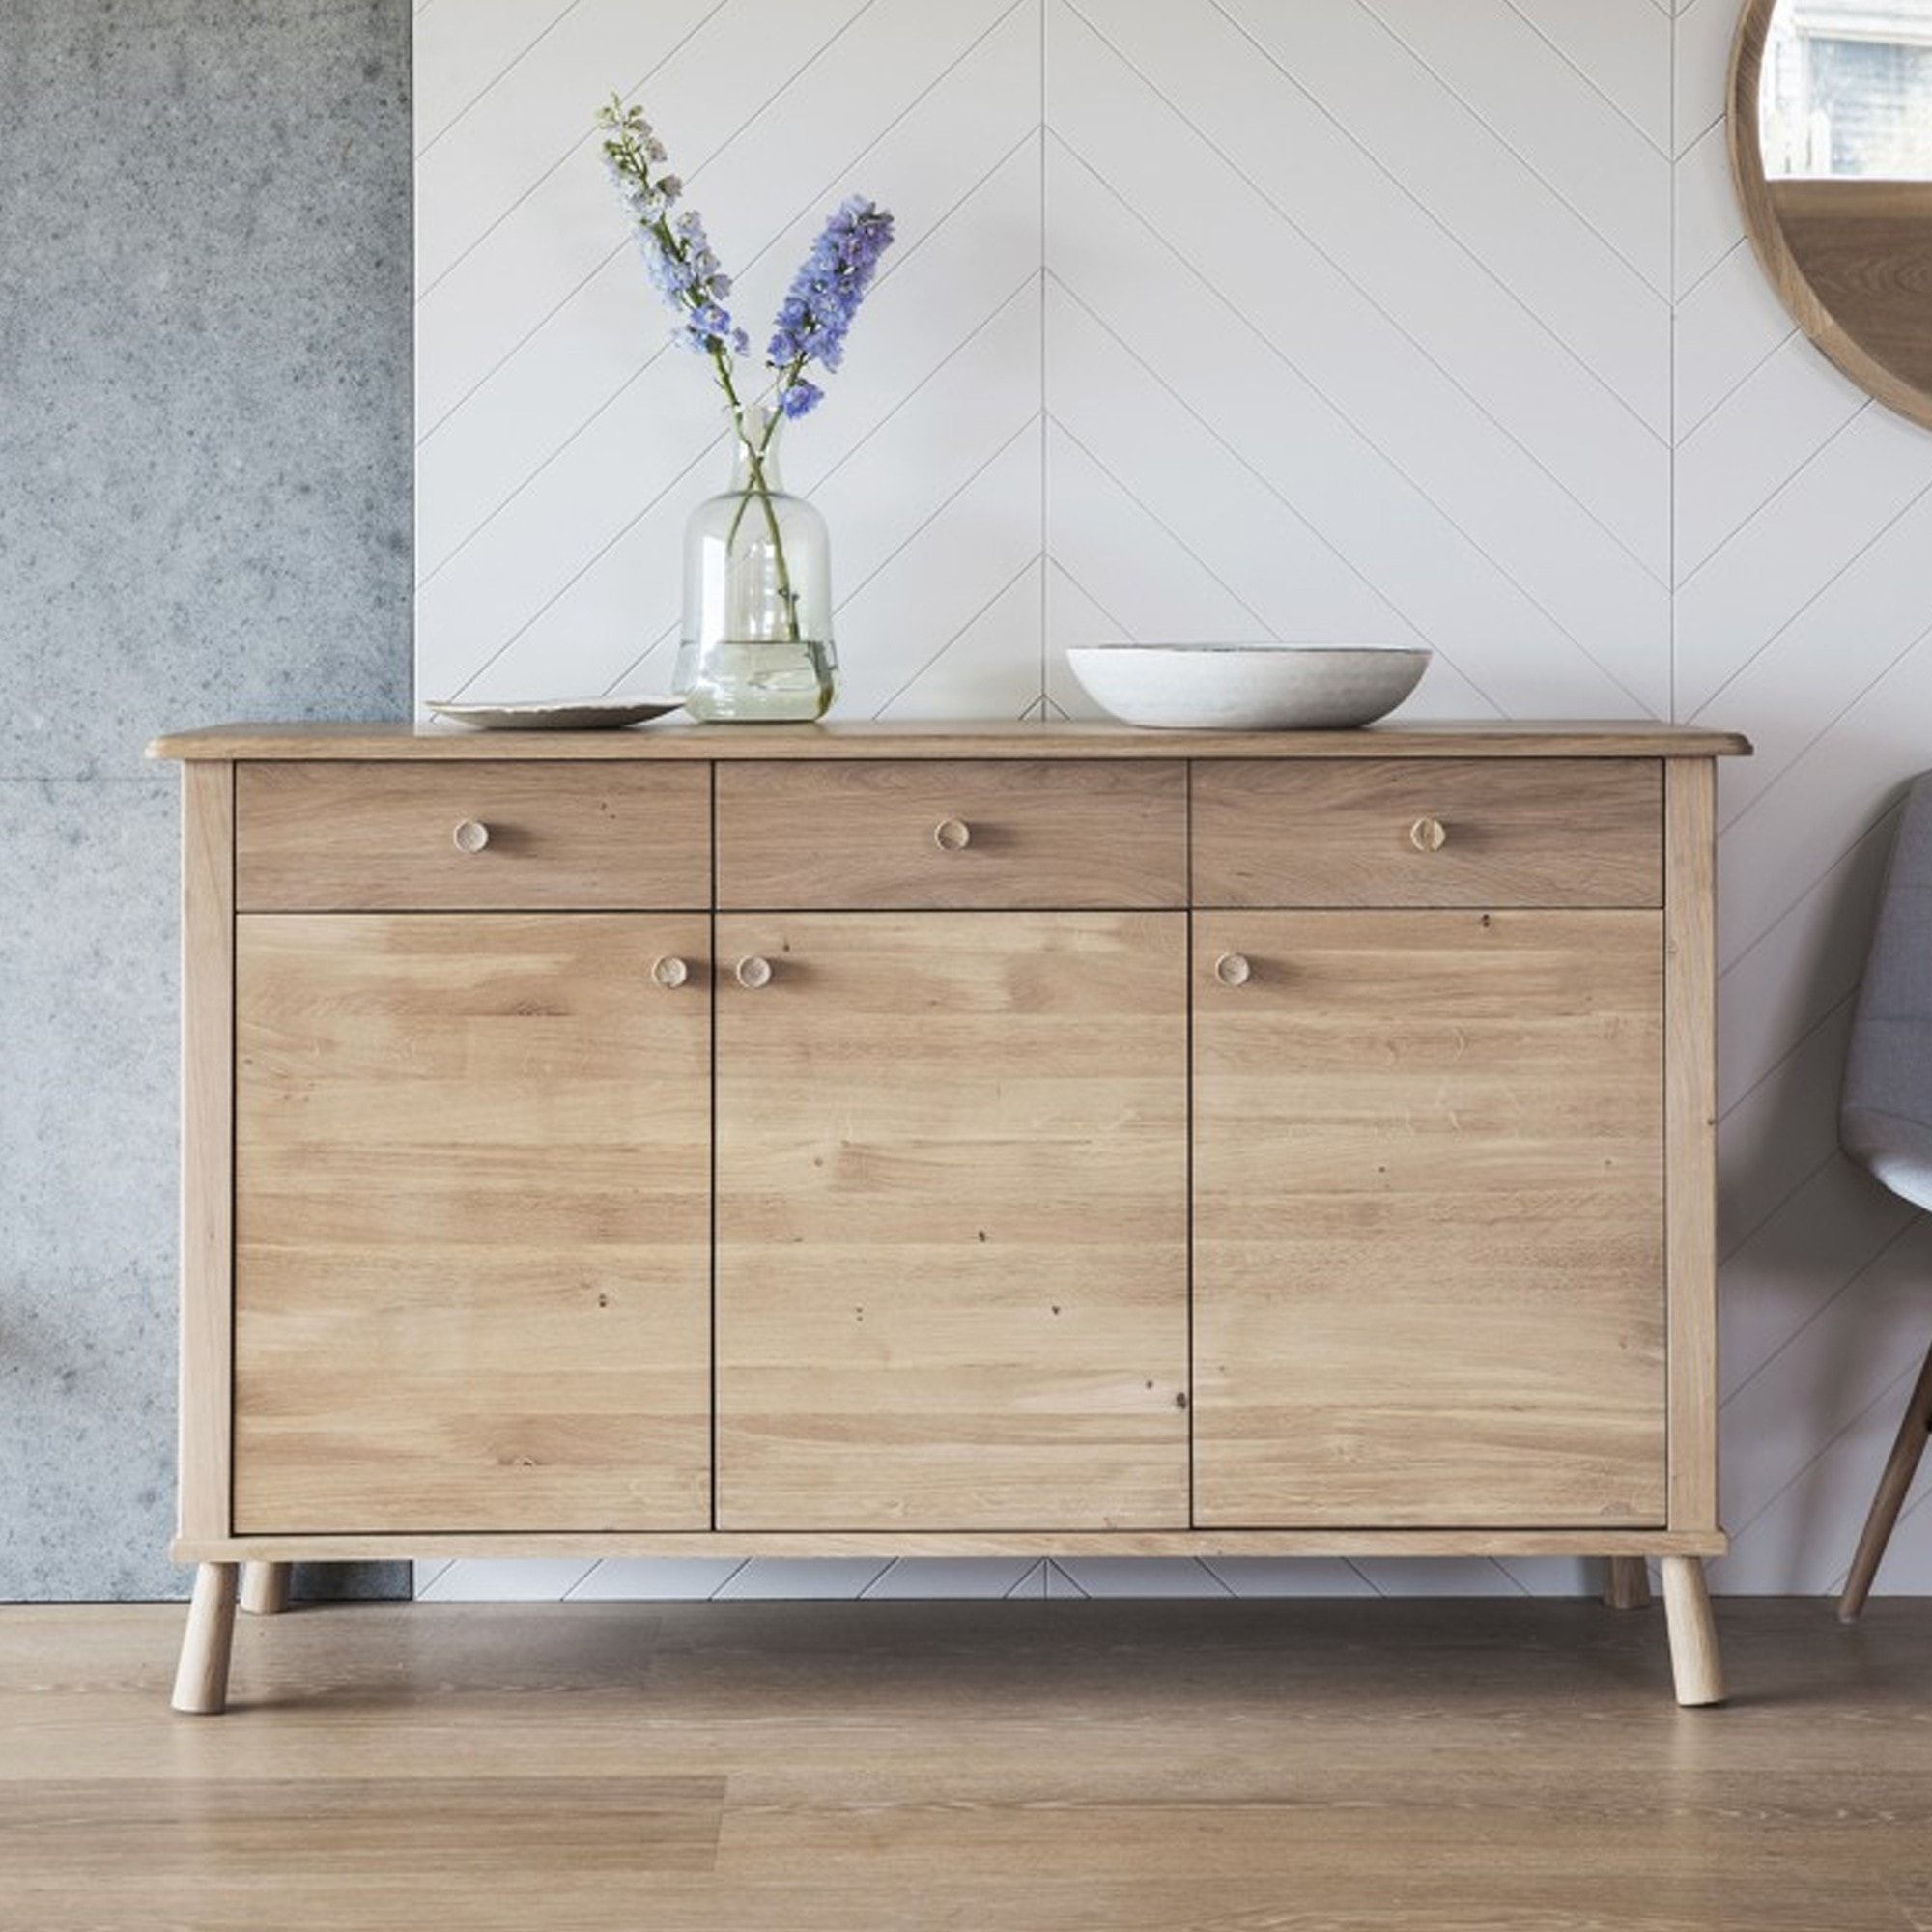 Wycombe 3 Door 3 Drawer Sideboard | Wooden Sideboards With Storage Pertaining To Sideboards With 3 Doors (View 11 of 15)